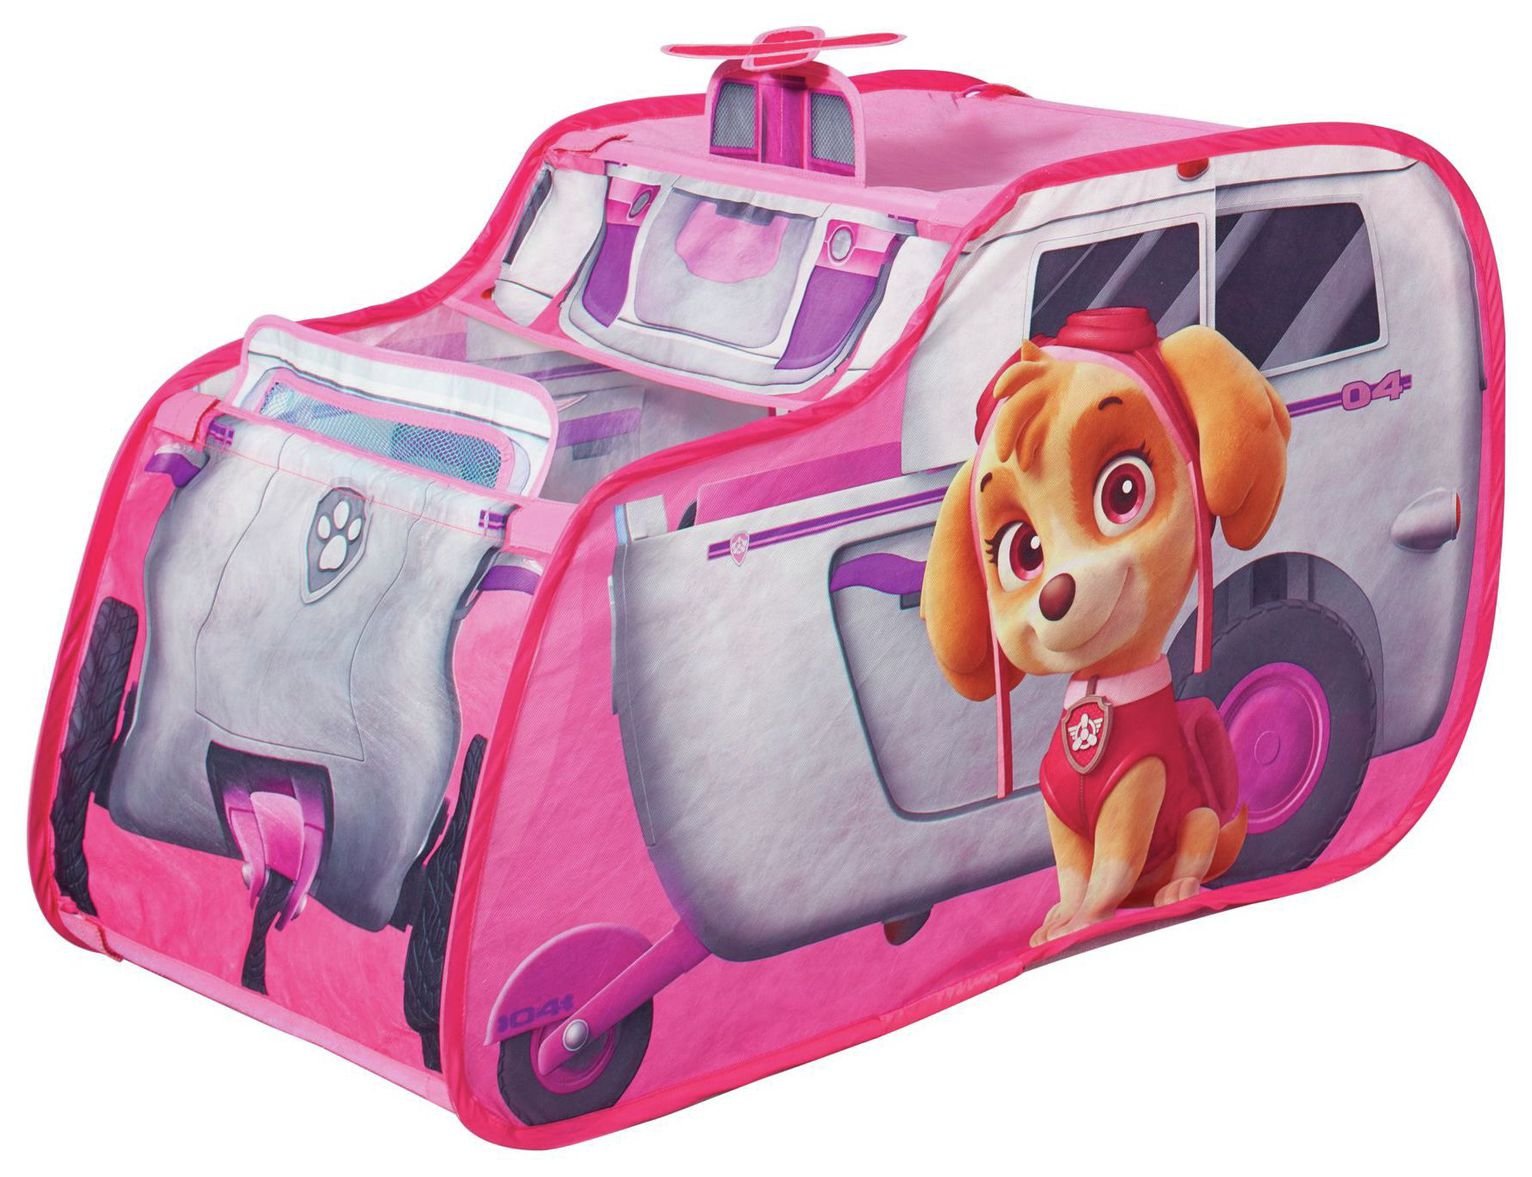 PAW Patrol Skye's Helicopter Pop Up Playtent Review